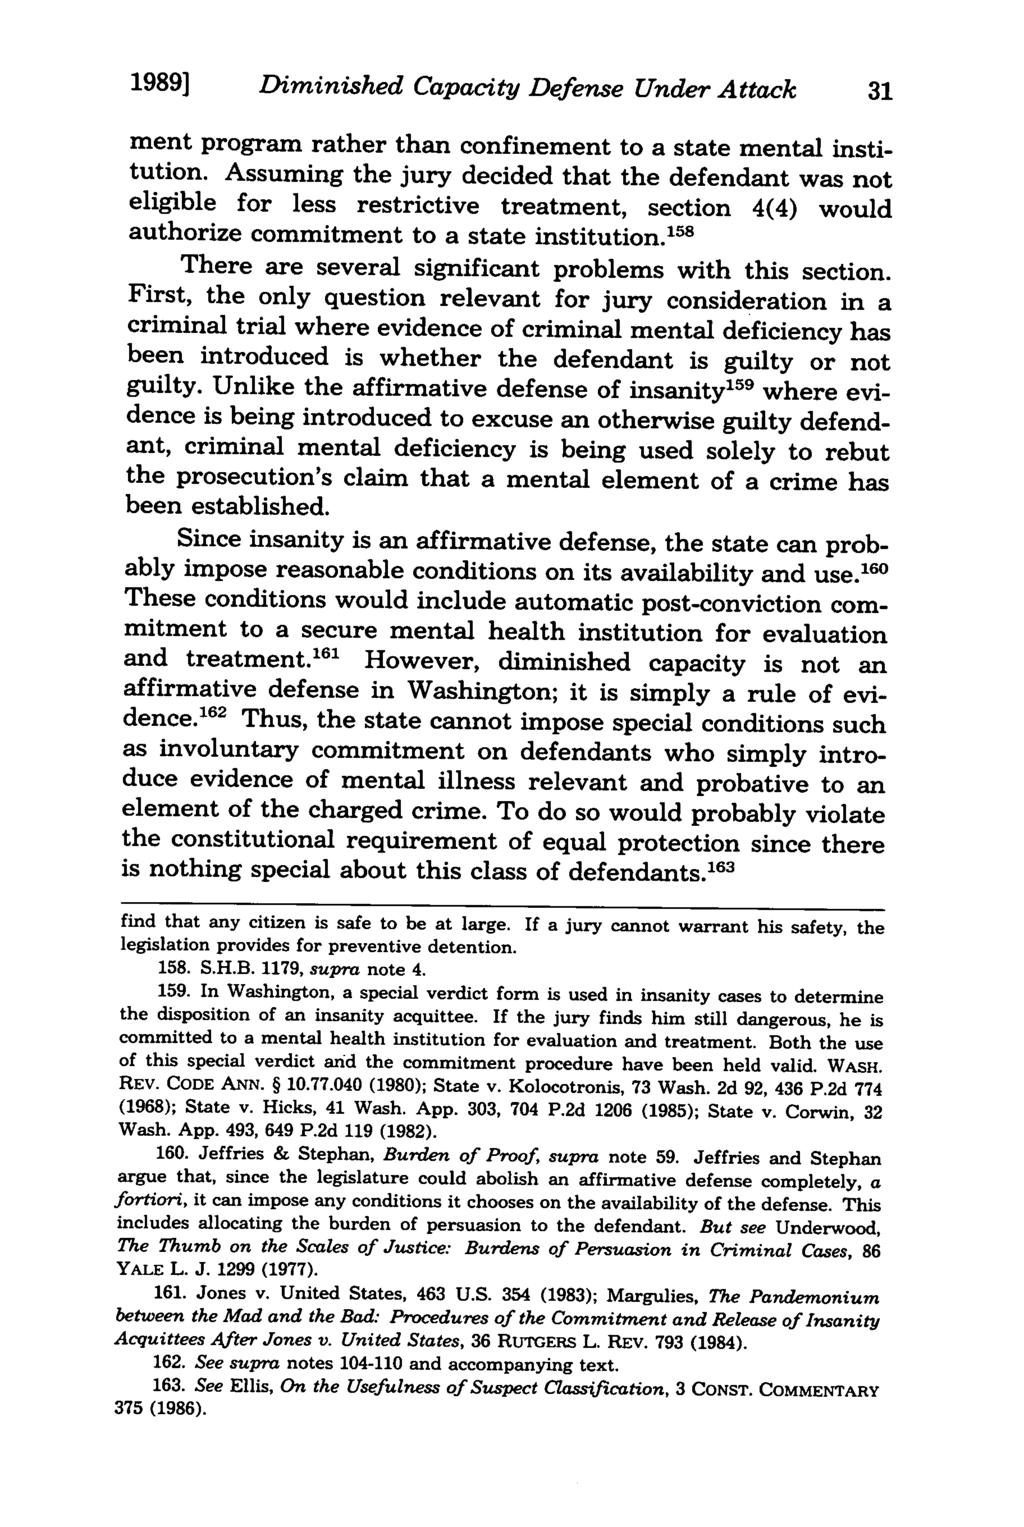 1989] Diminished Capacity Defense Under Attack ment program rather than confinement to a state mental institution.